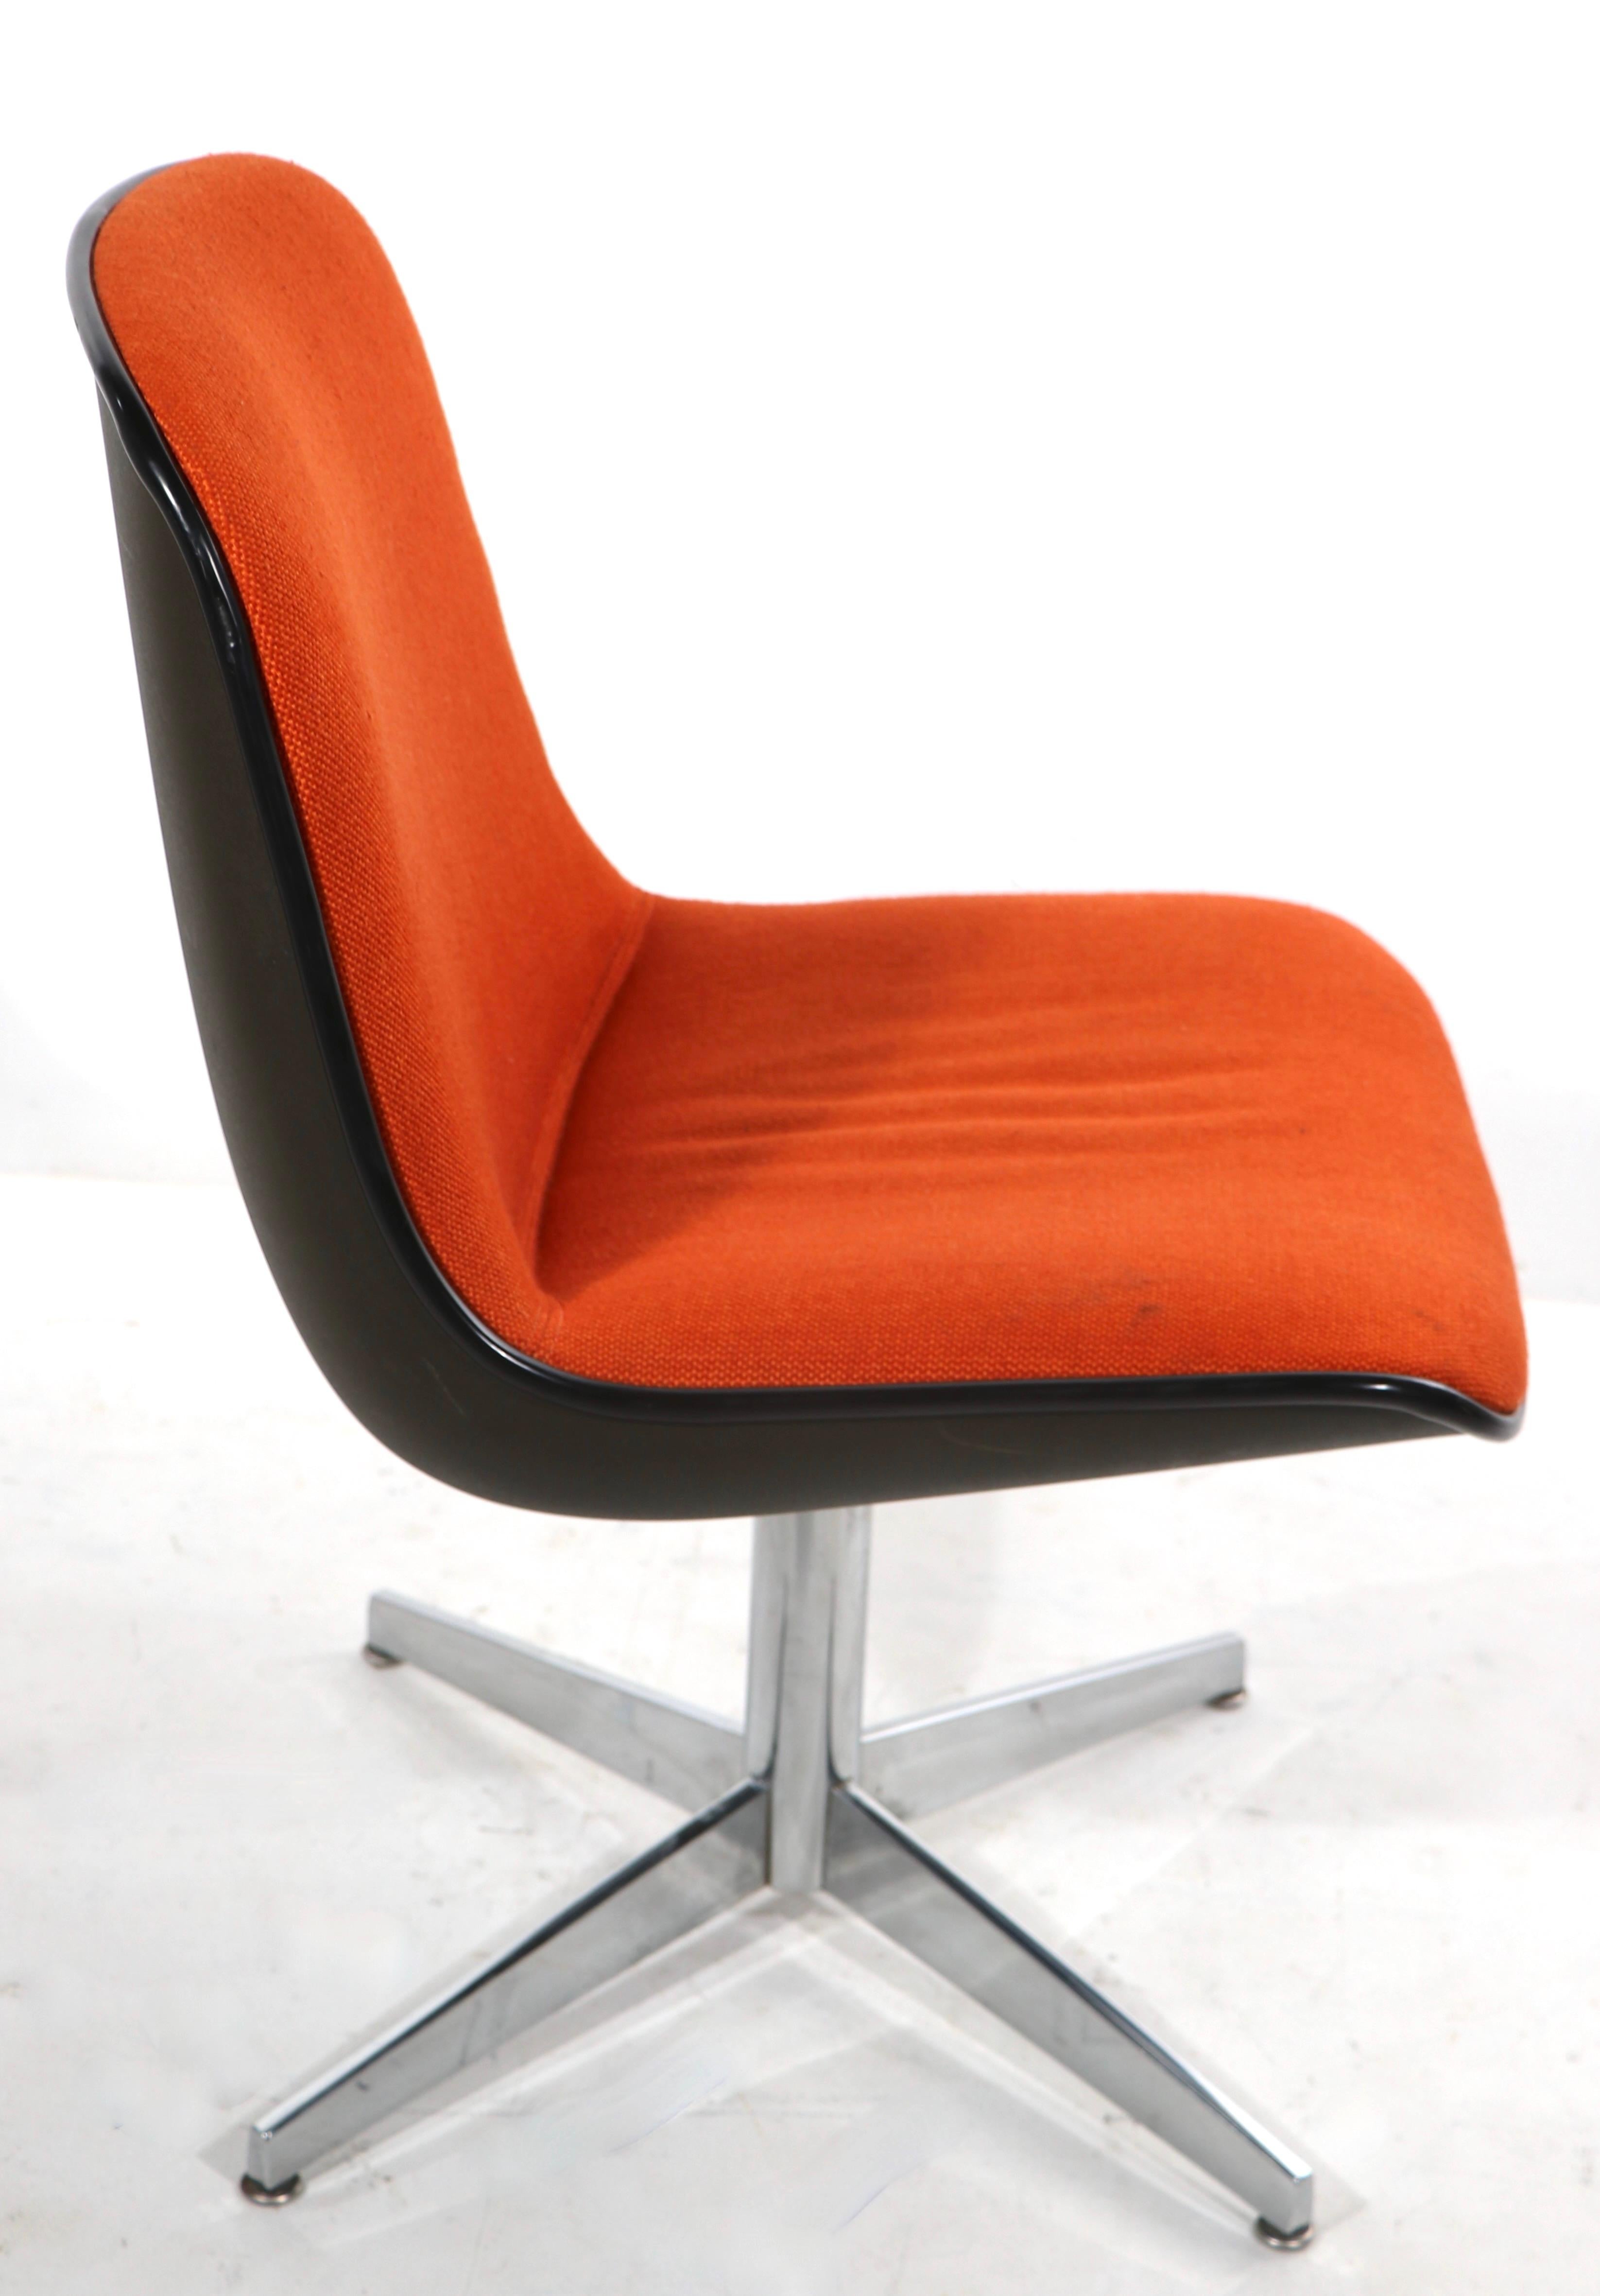 Sharp office, desk, side, or dining chair(s) having a continuous orange tweed seat and back, with dark gray plastic shell, on a bright chrome base and legs. The chairs are stationary, ie they do not swivel or tilt. Both are in very good, original